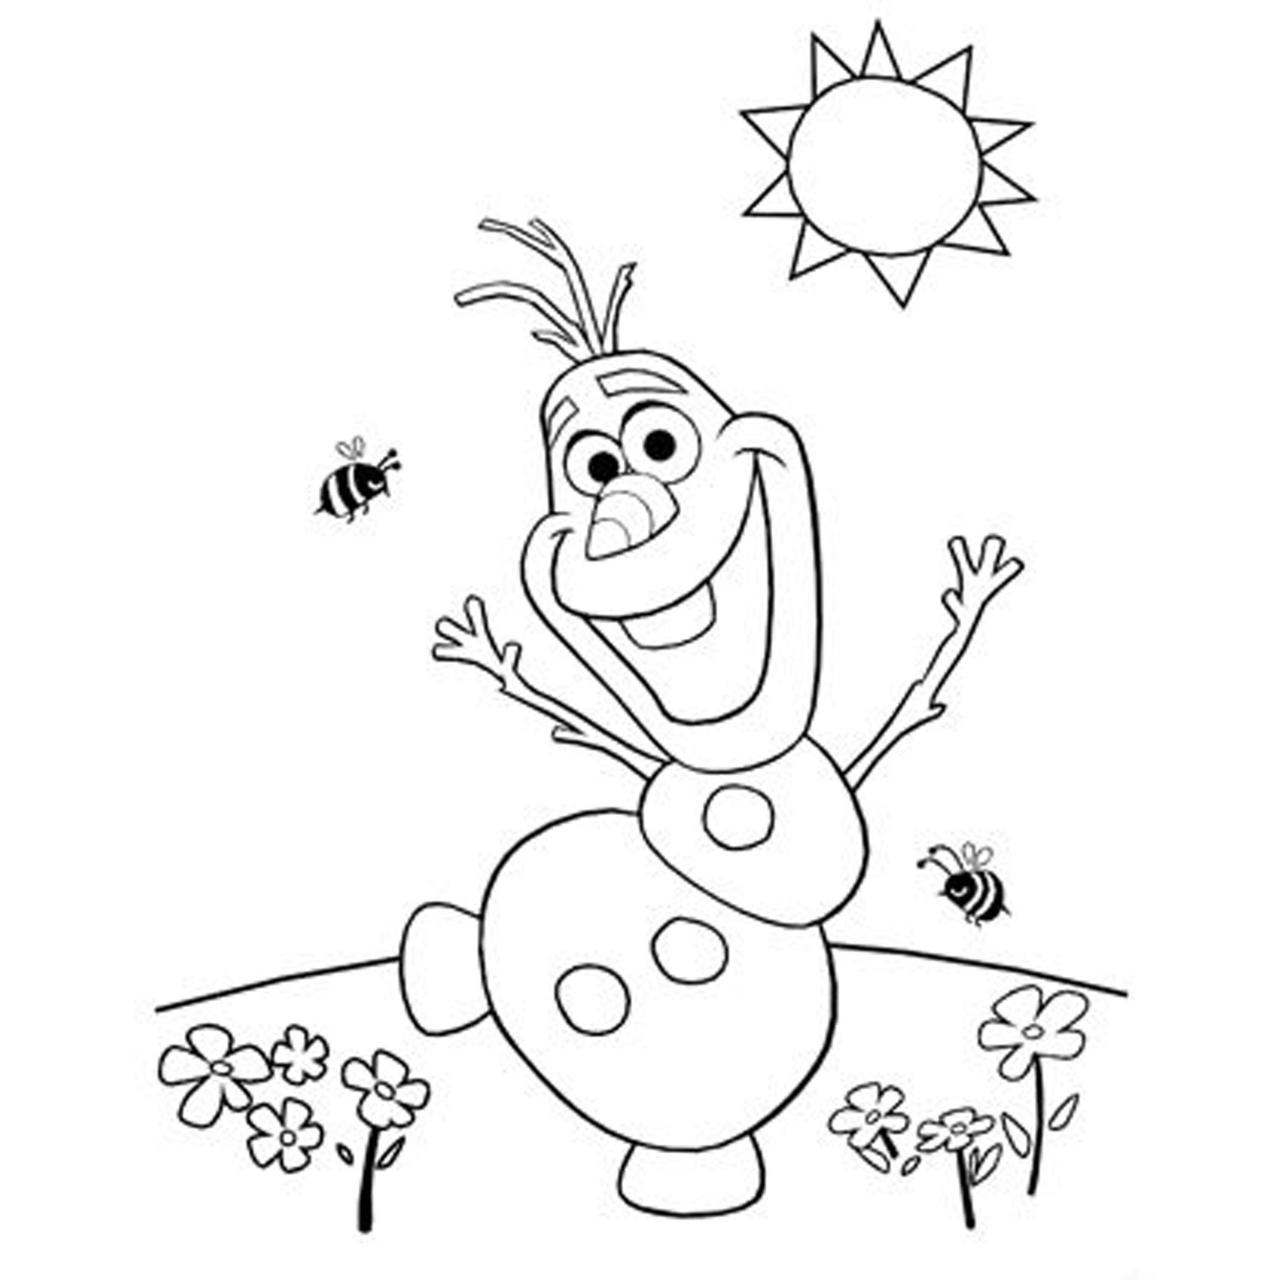 Olaf Christmas Coloring Pages at Free printable